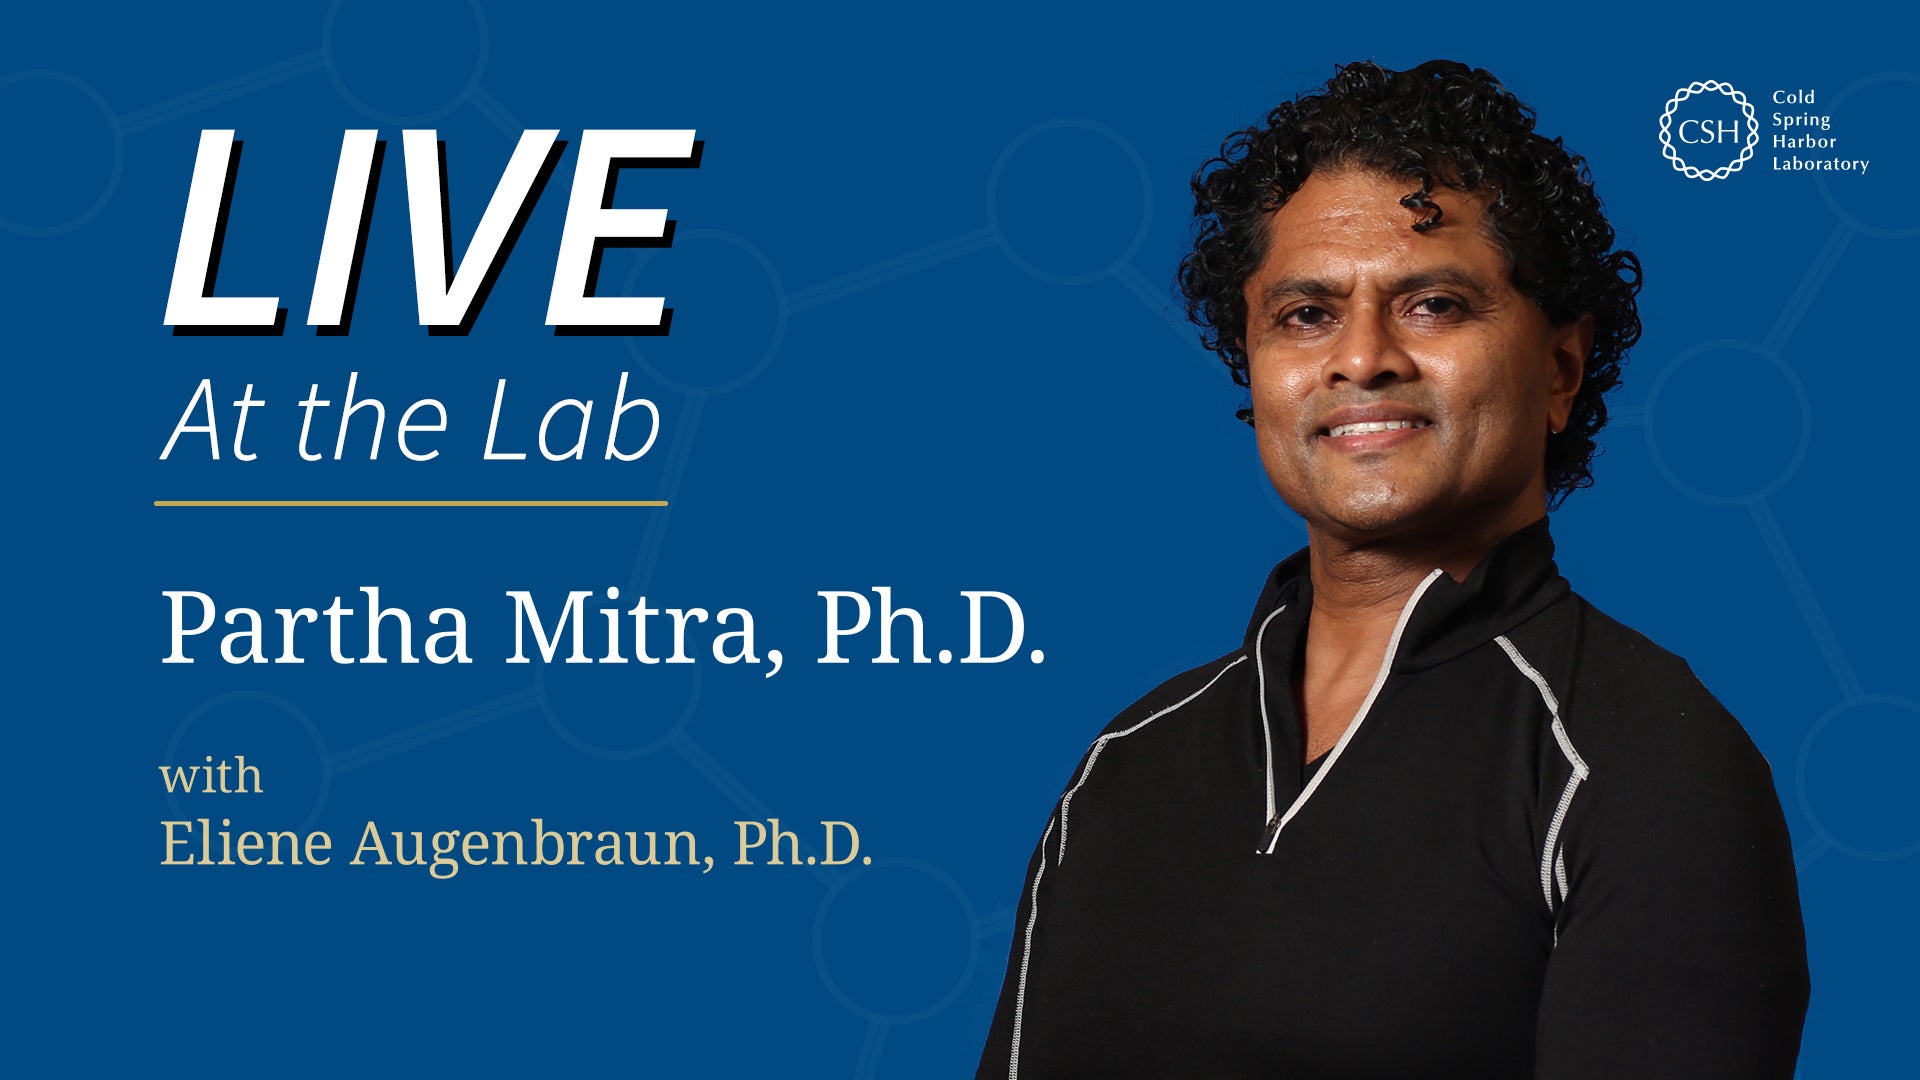 Hero image for Live at the Lab event with Partha Mitra